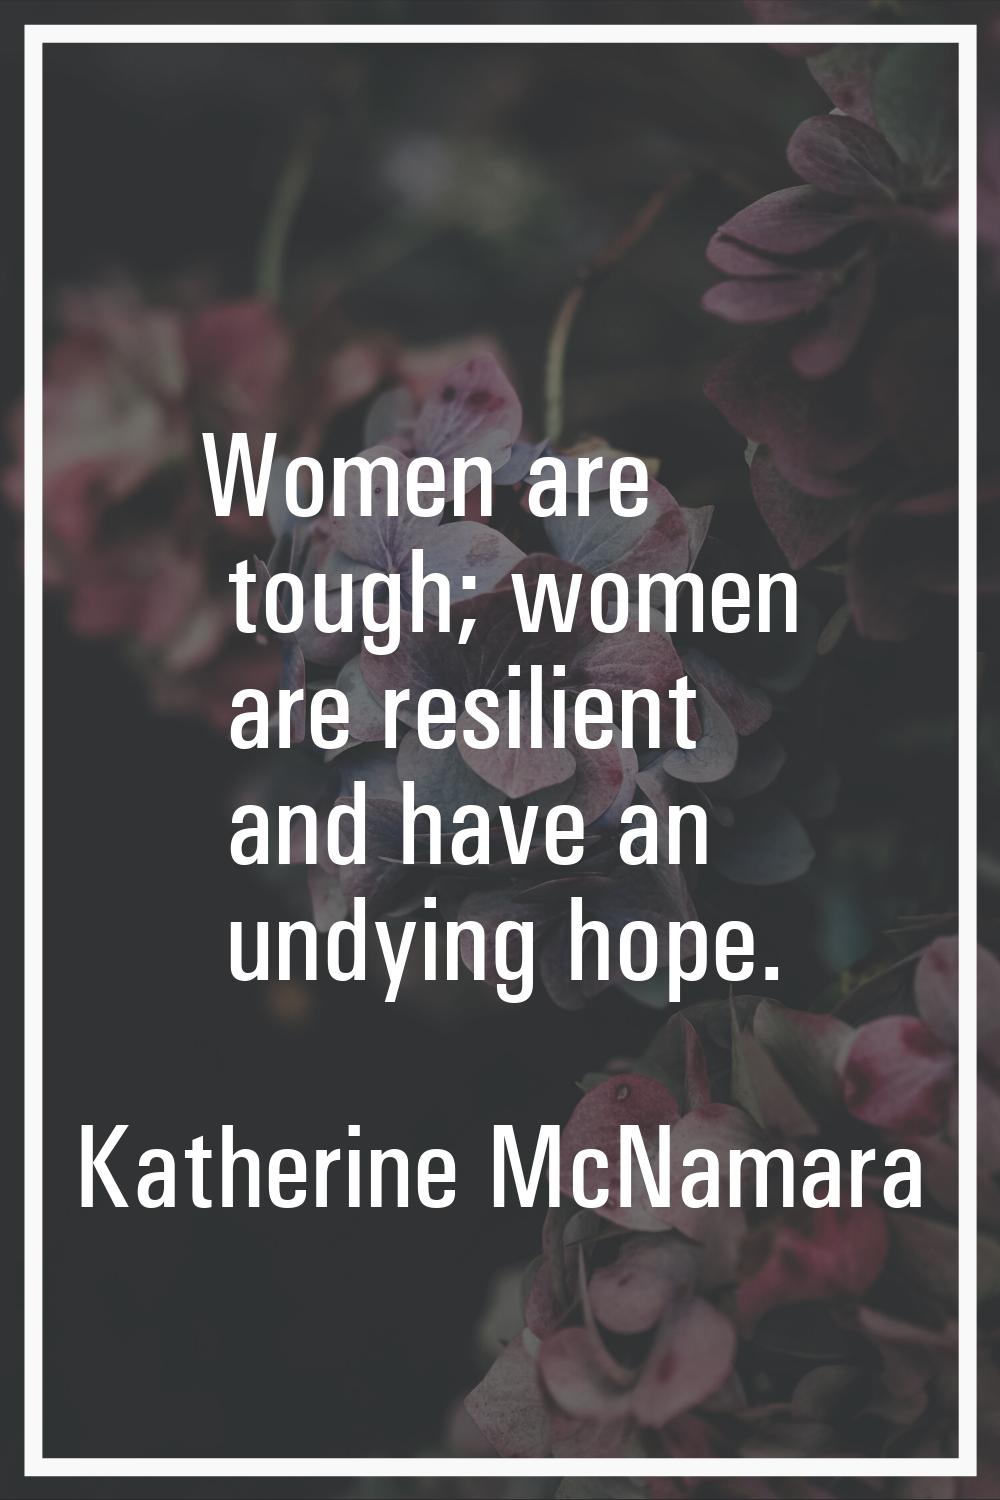 Women are tough; women are resilient and have an undying hope.